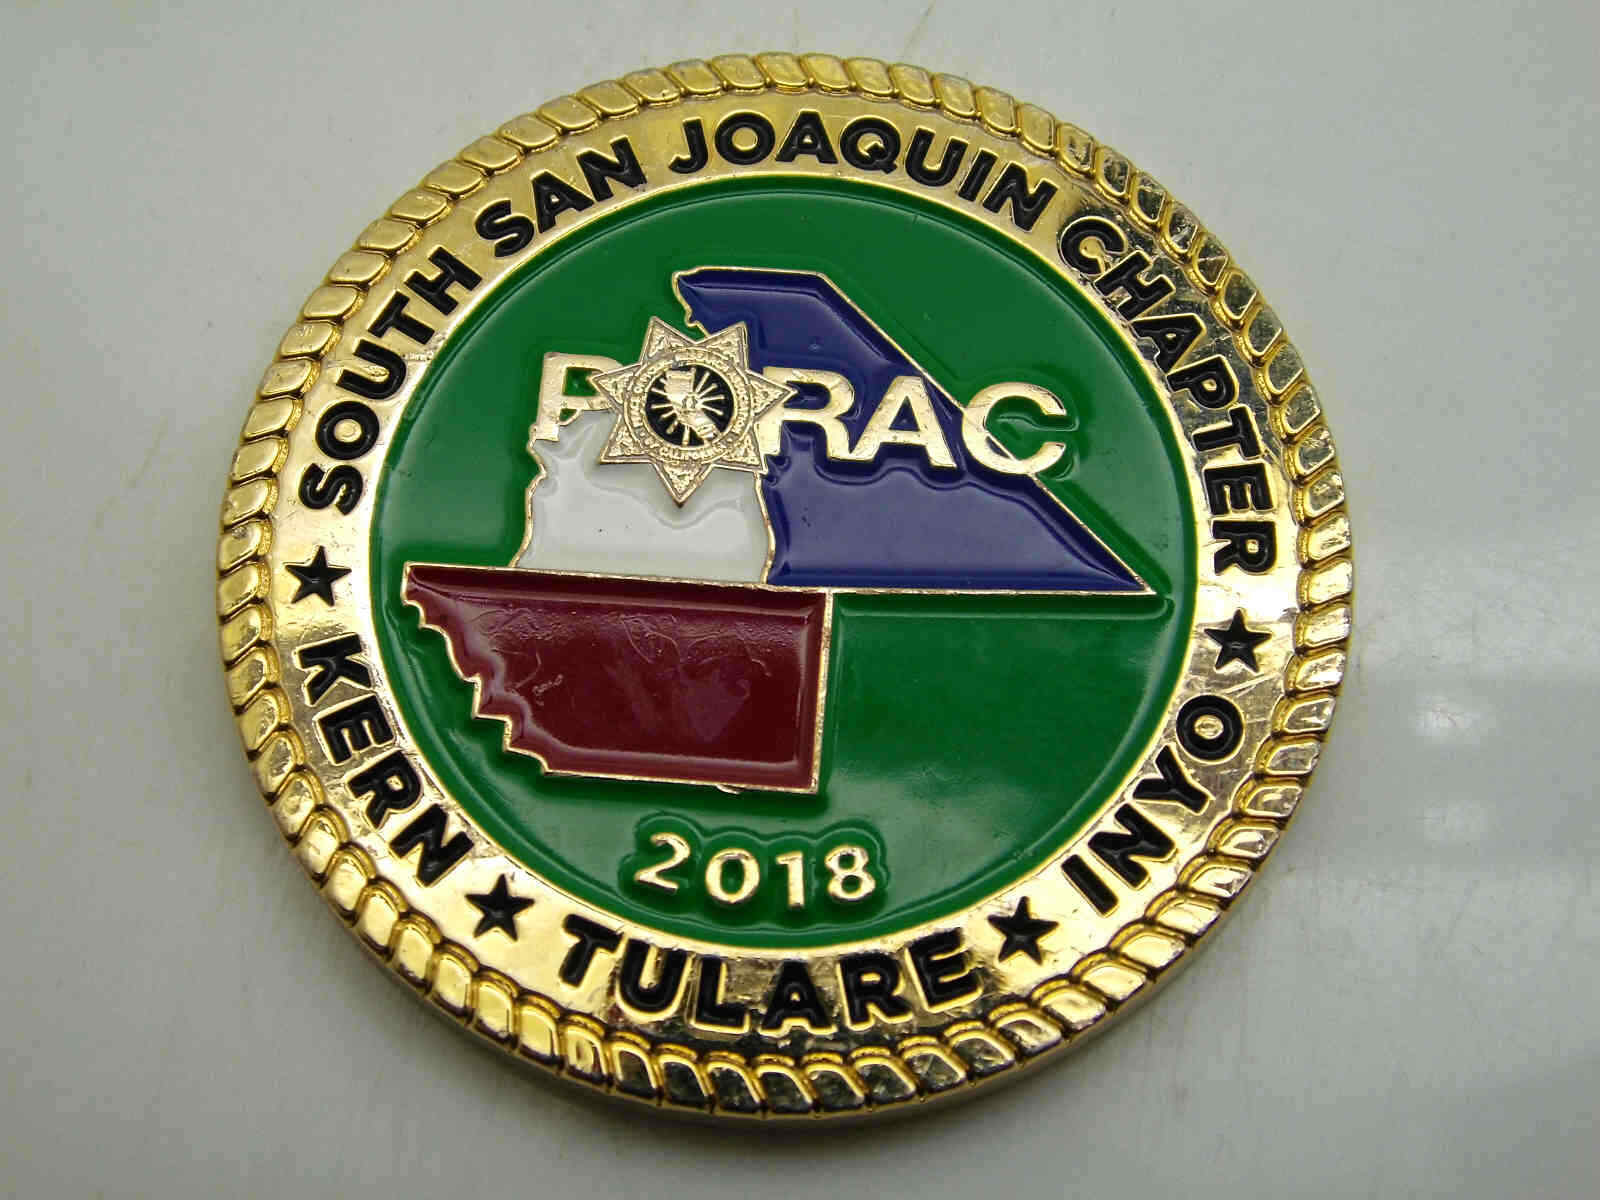 SOUTH SAN JOAQUIN CHAPTER CHALLENGE COIN